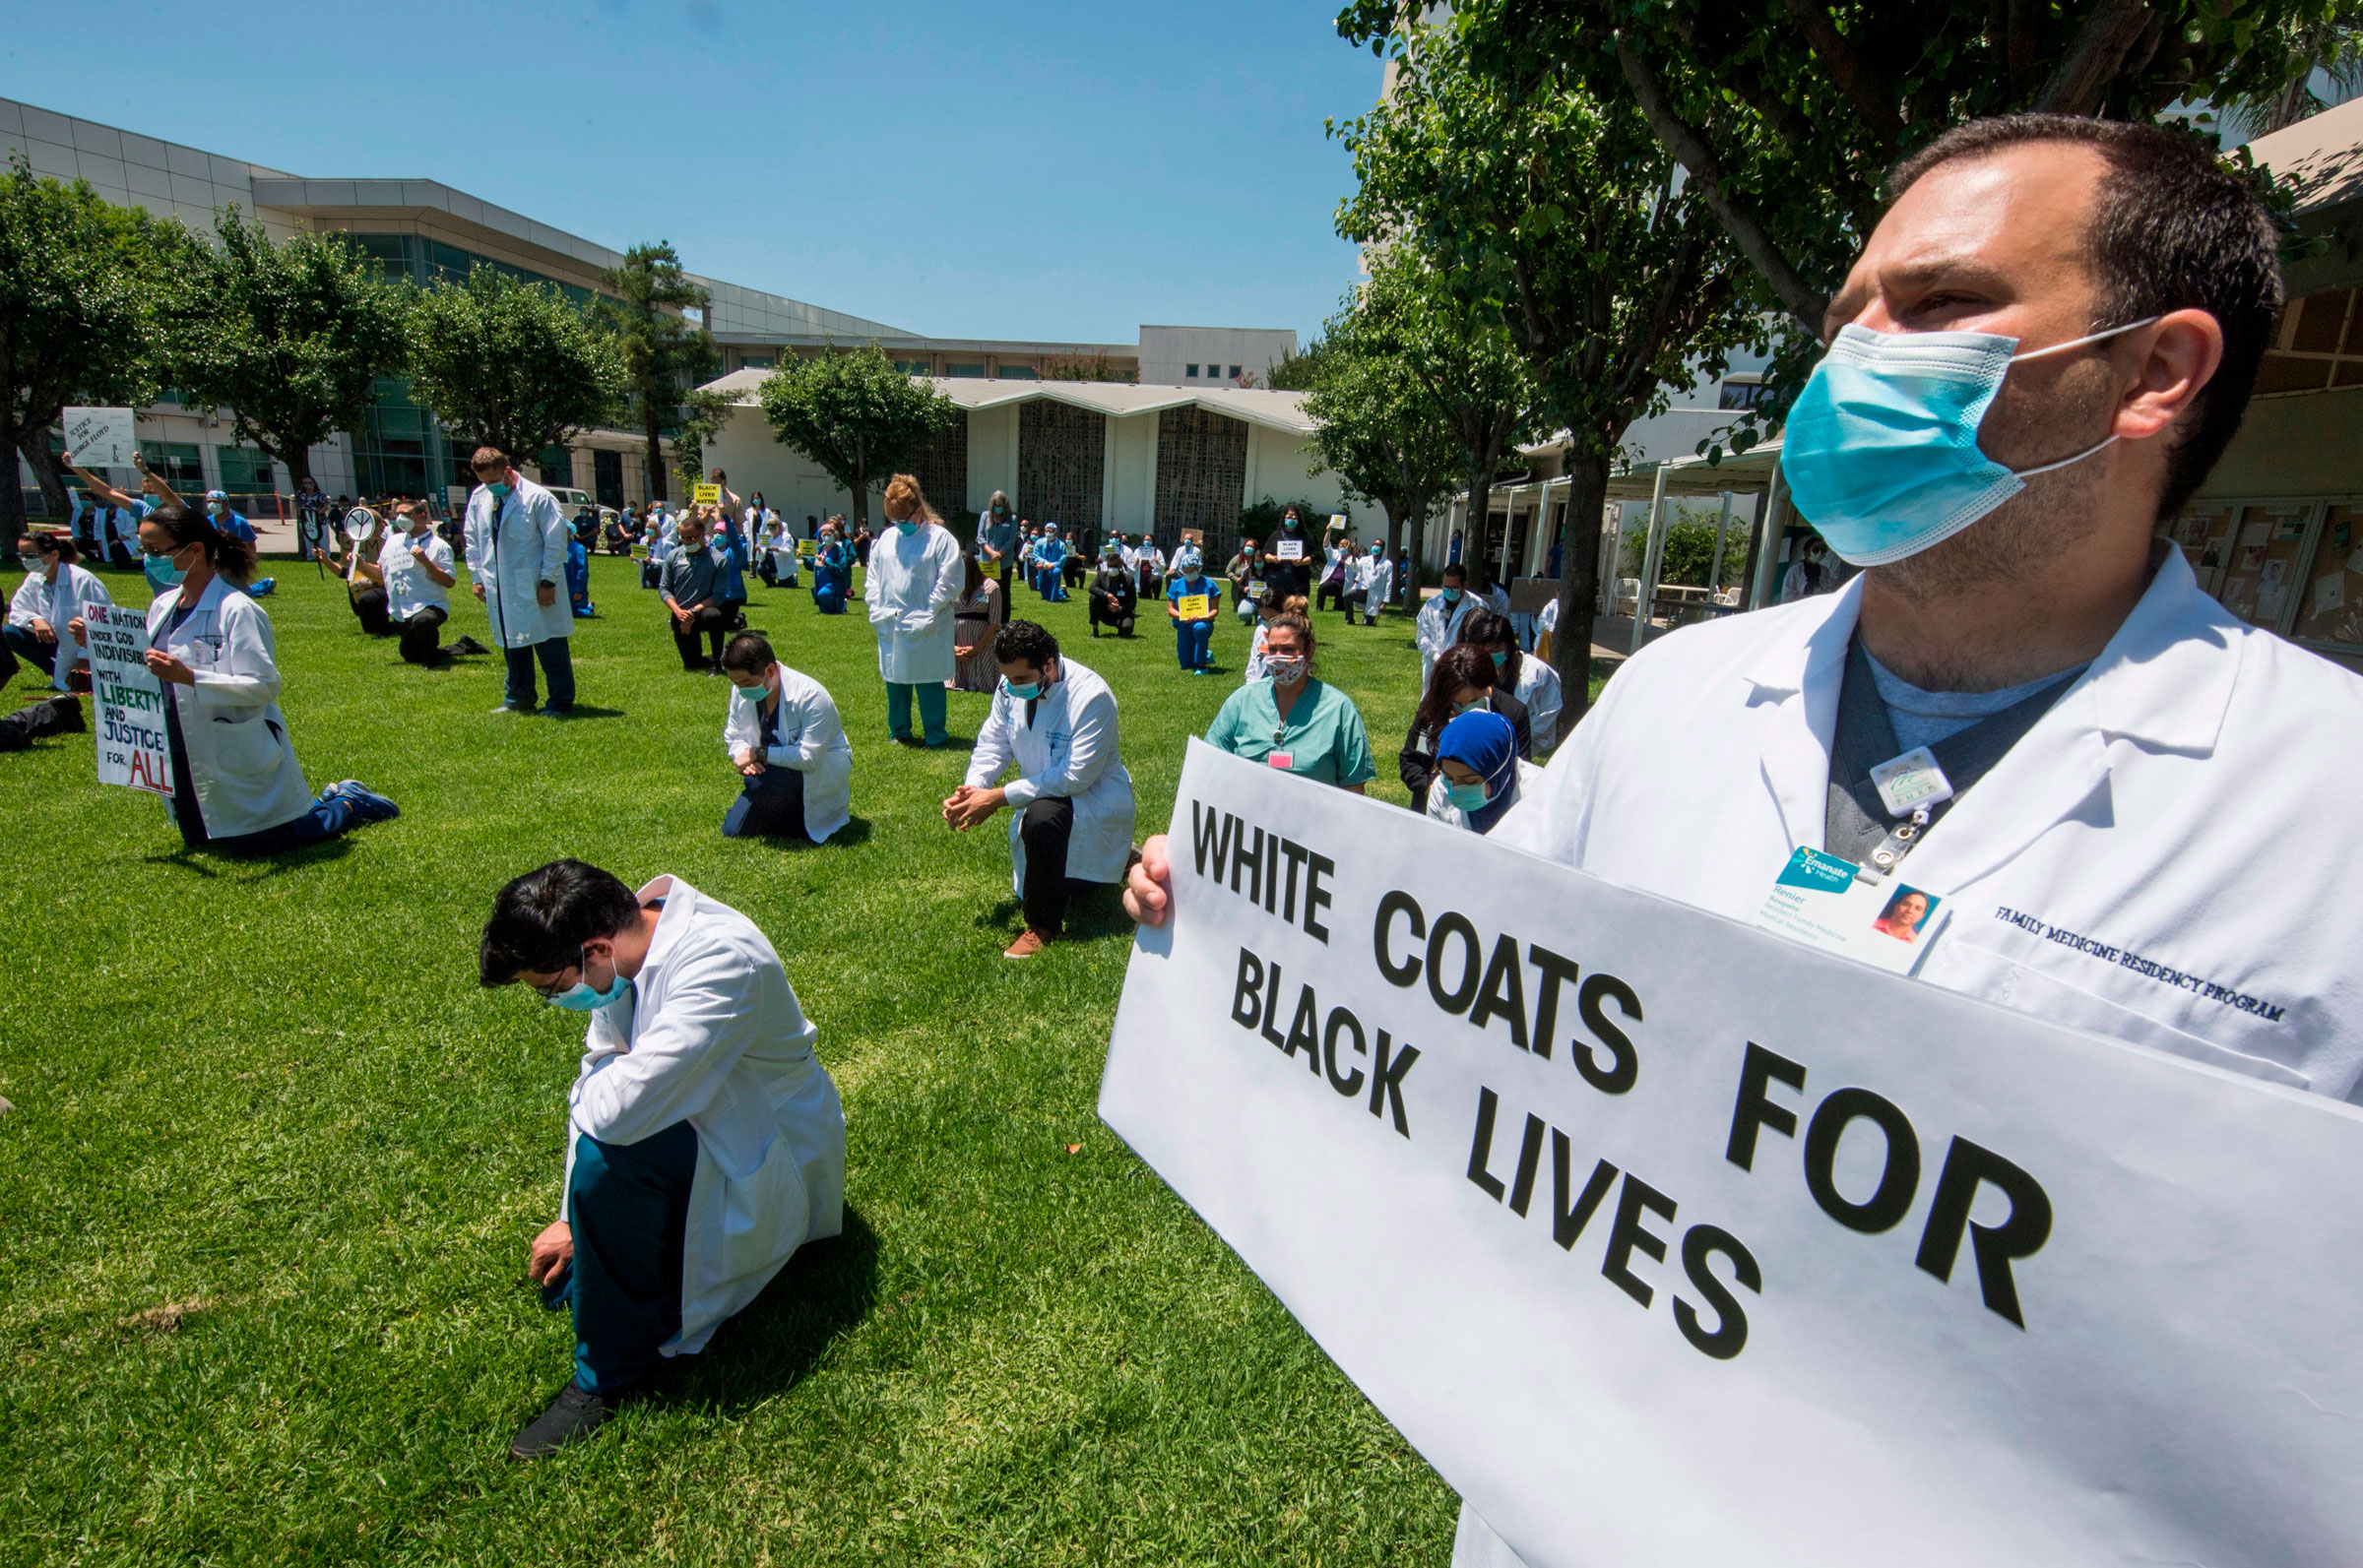 People kneel as doctors, nurses and other health care workers participate in a "White Coats for Black Lives" event in solidarity with George Floyd and other black Americans killed by police officers, at the Queen of the Valley Hospital in West Covina, California on June 11, 2020. (Mark Ralston—AFP/Getty Images)